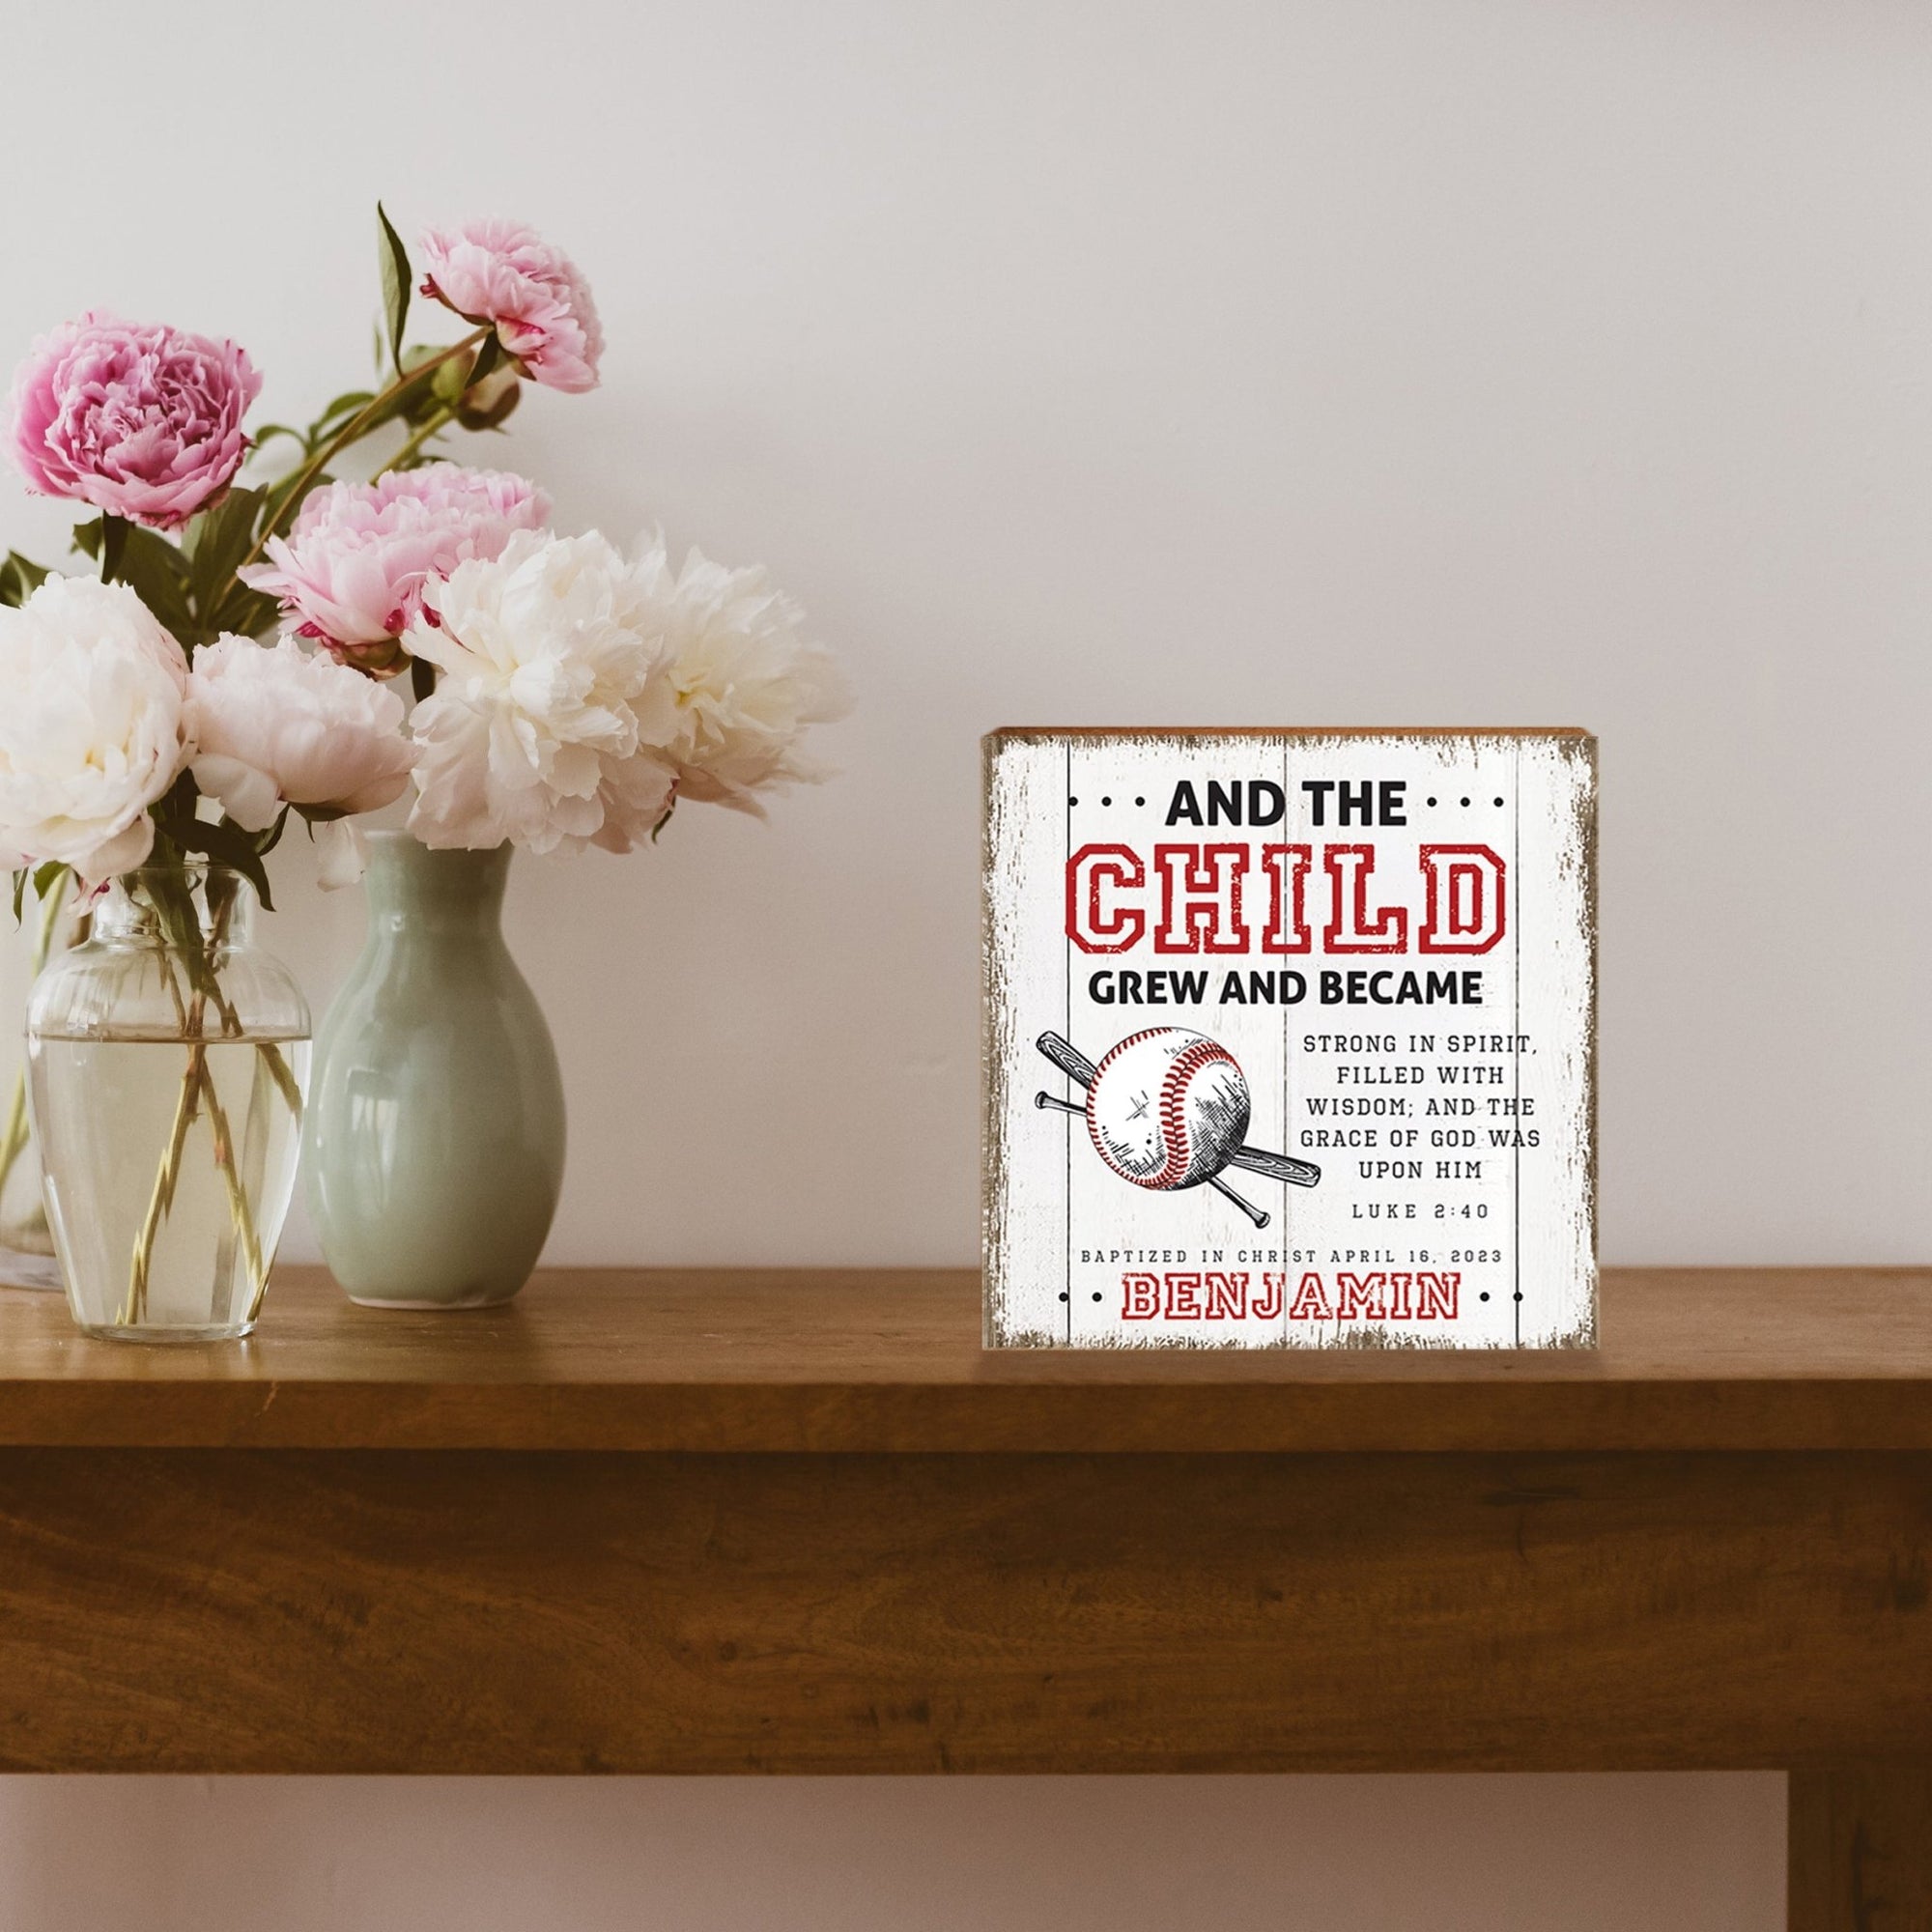 Personalized Rustic Wooden Baseball Shadow Box Shelf Décor With Inspiring Bible Verses - And The Child - LifeSong Milestones